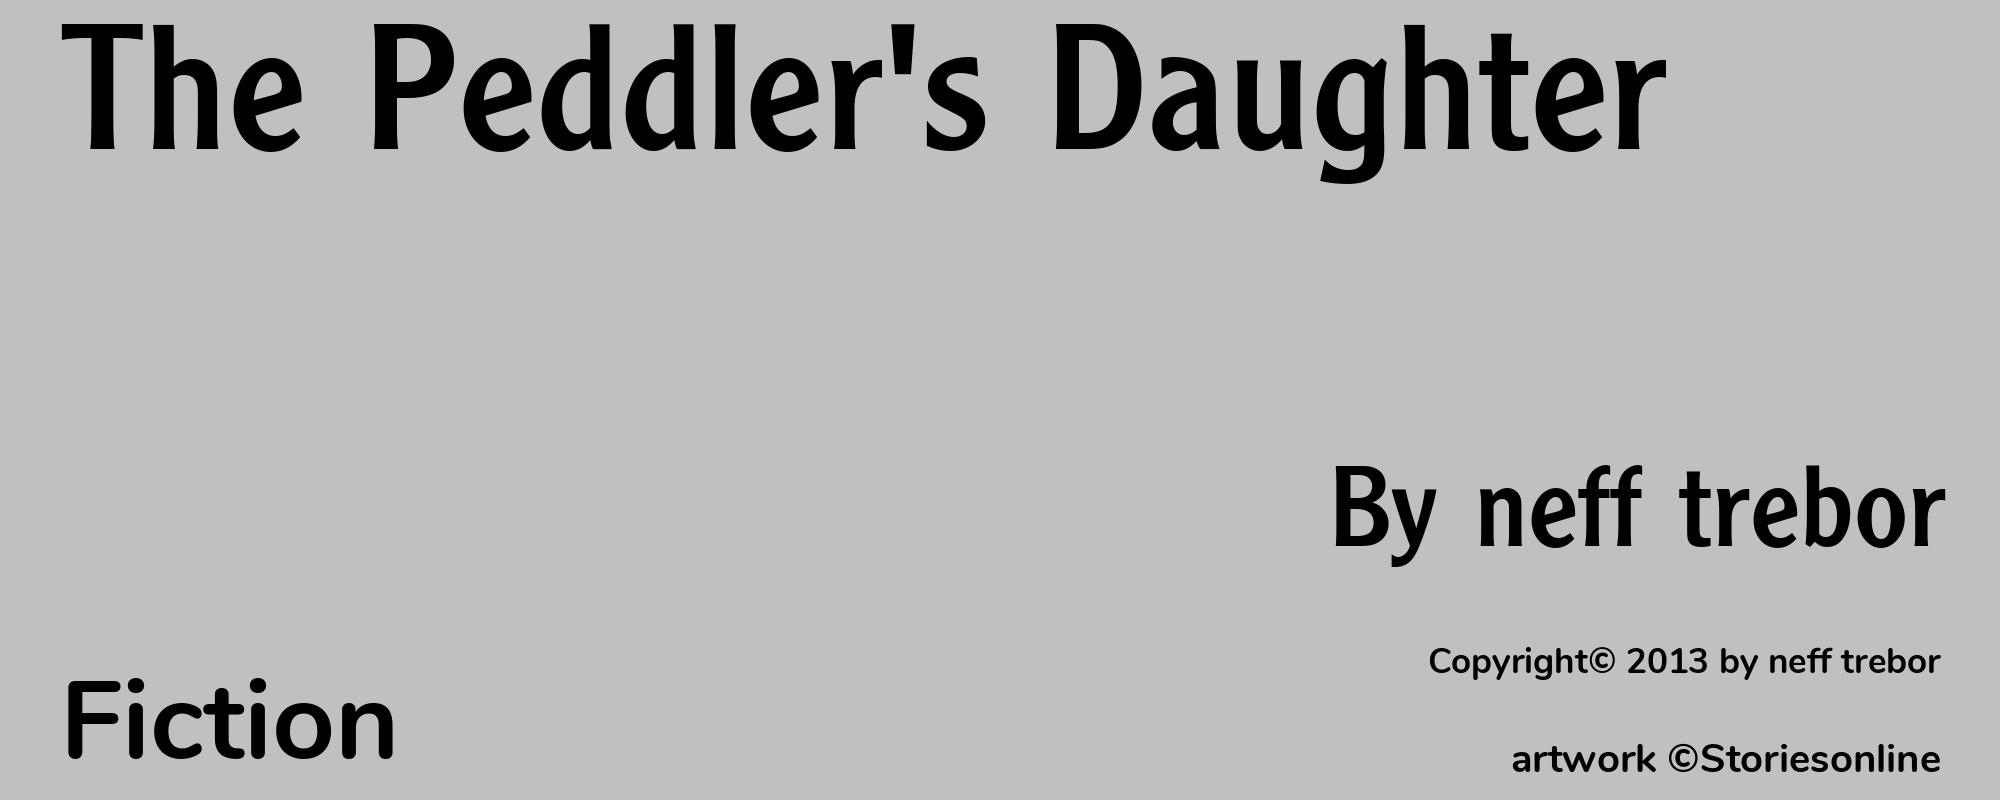 The Peddler's Daughter - Cover